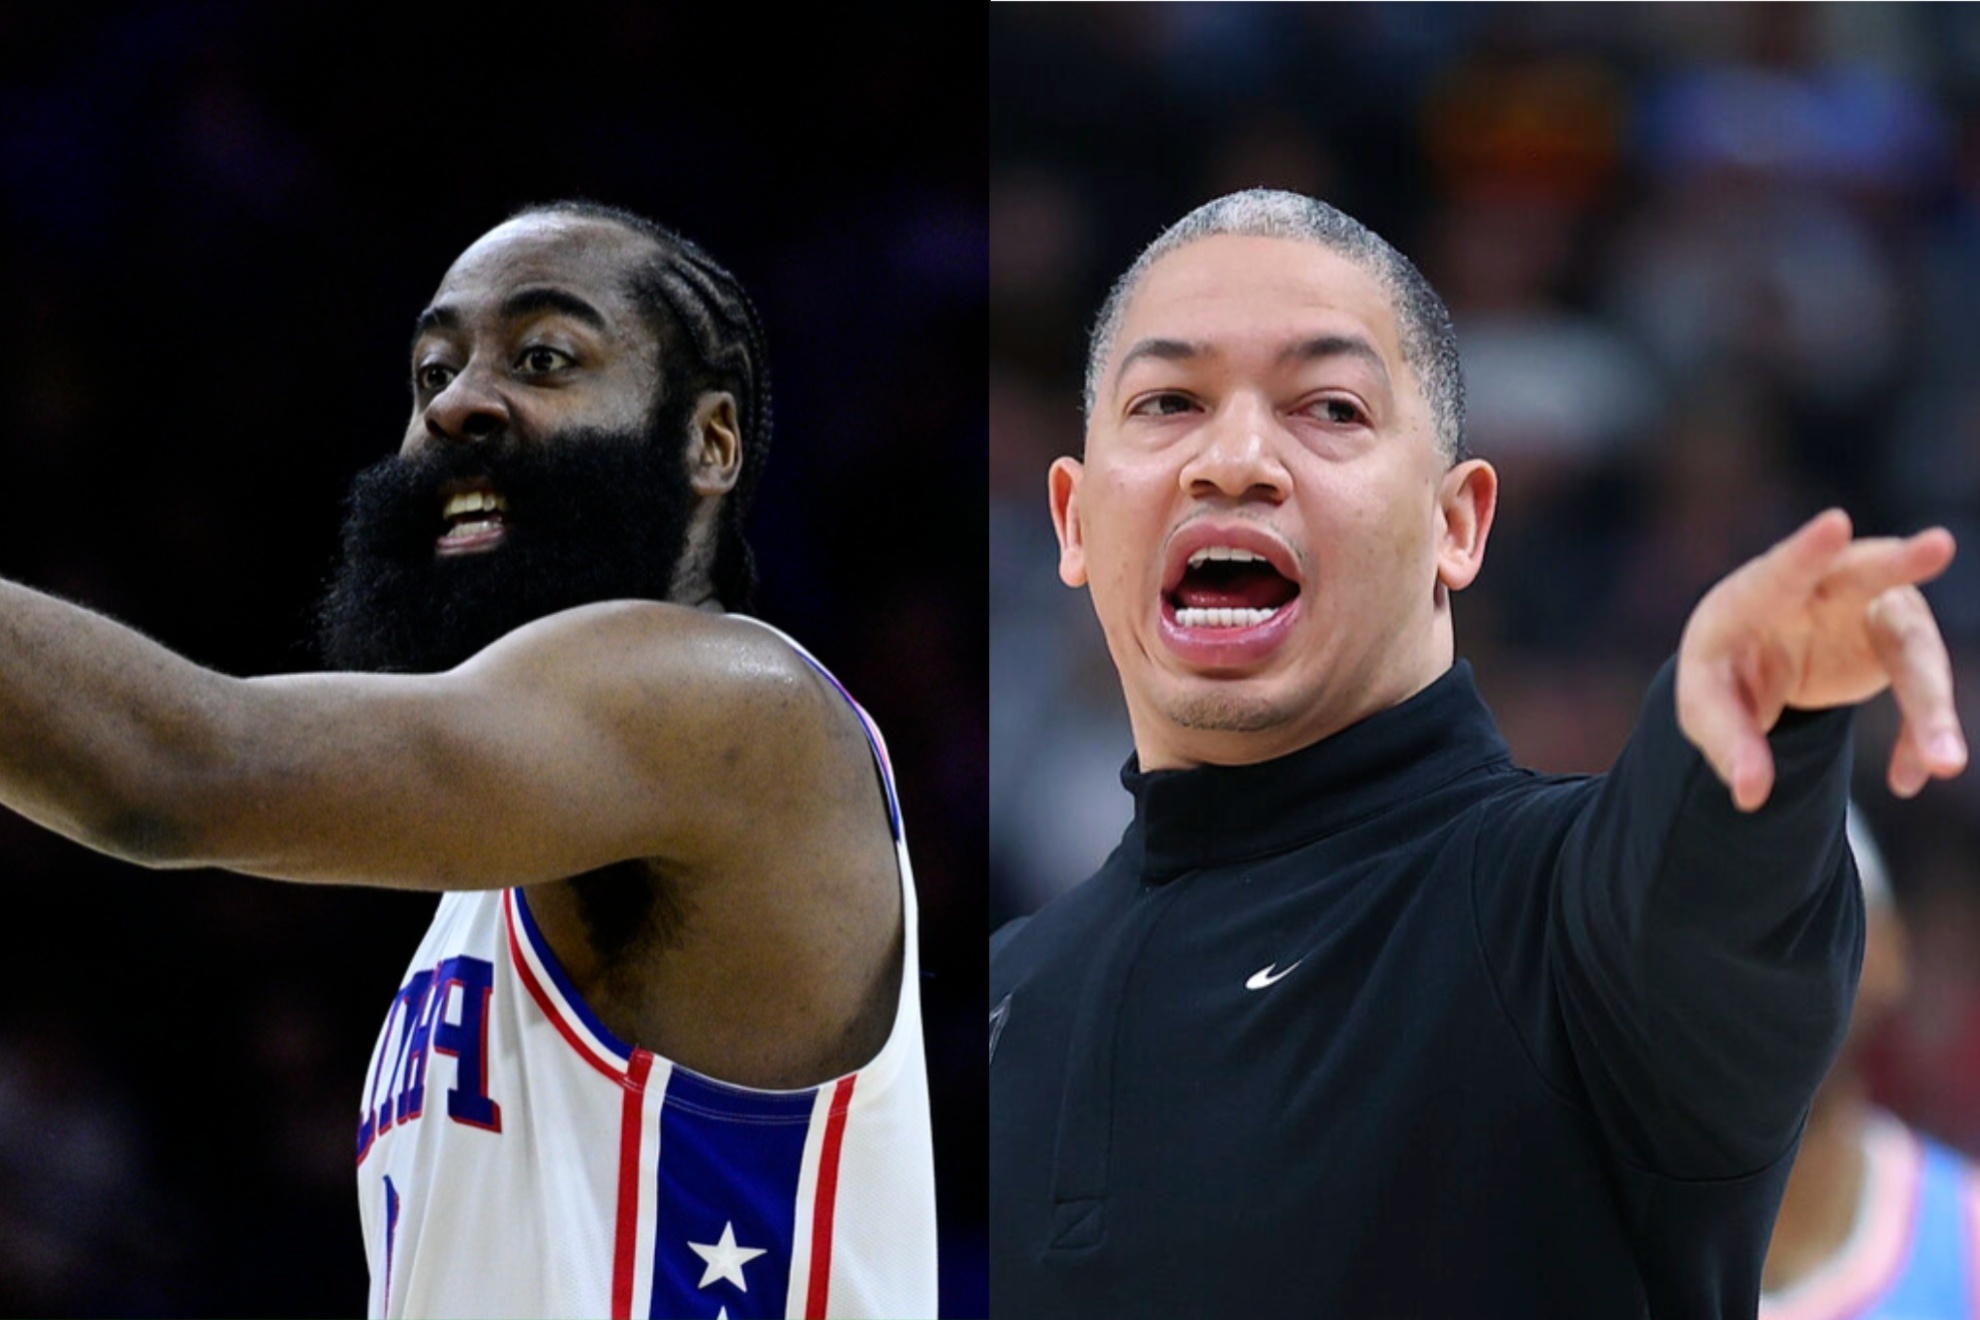 Coach Lue is losing patience with "The Beard."